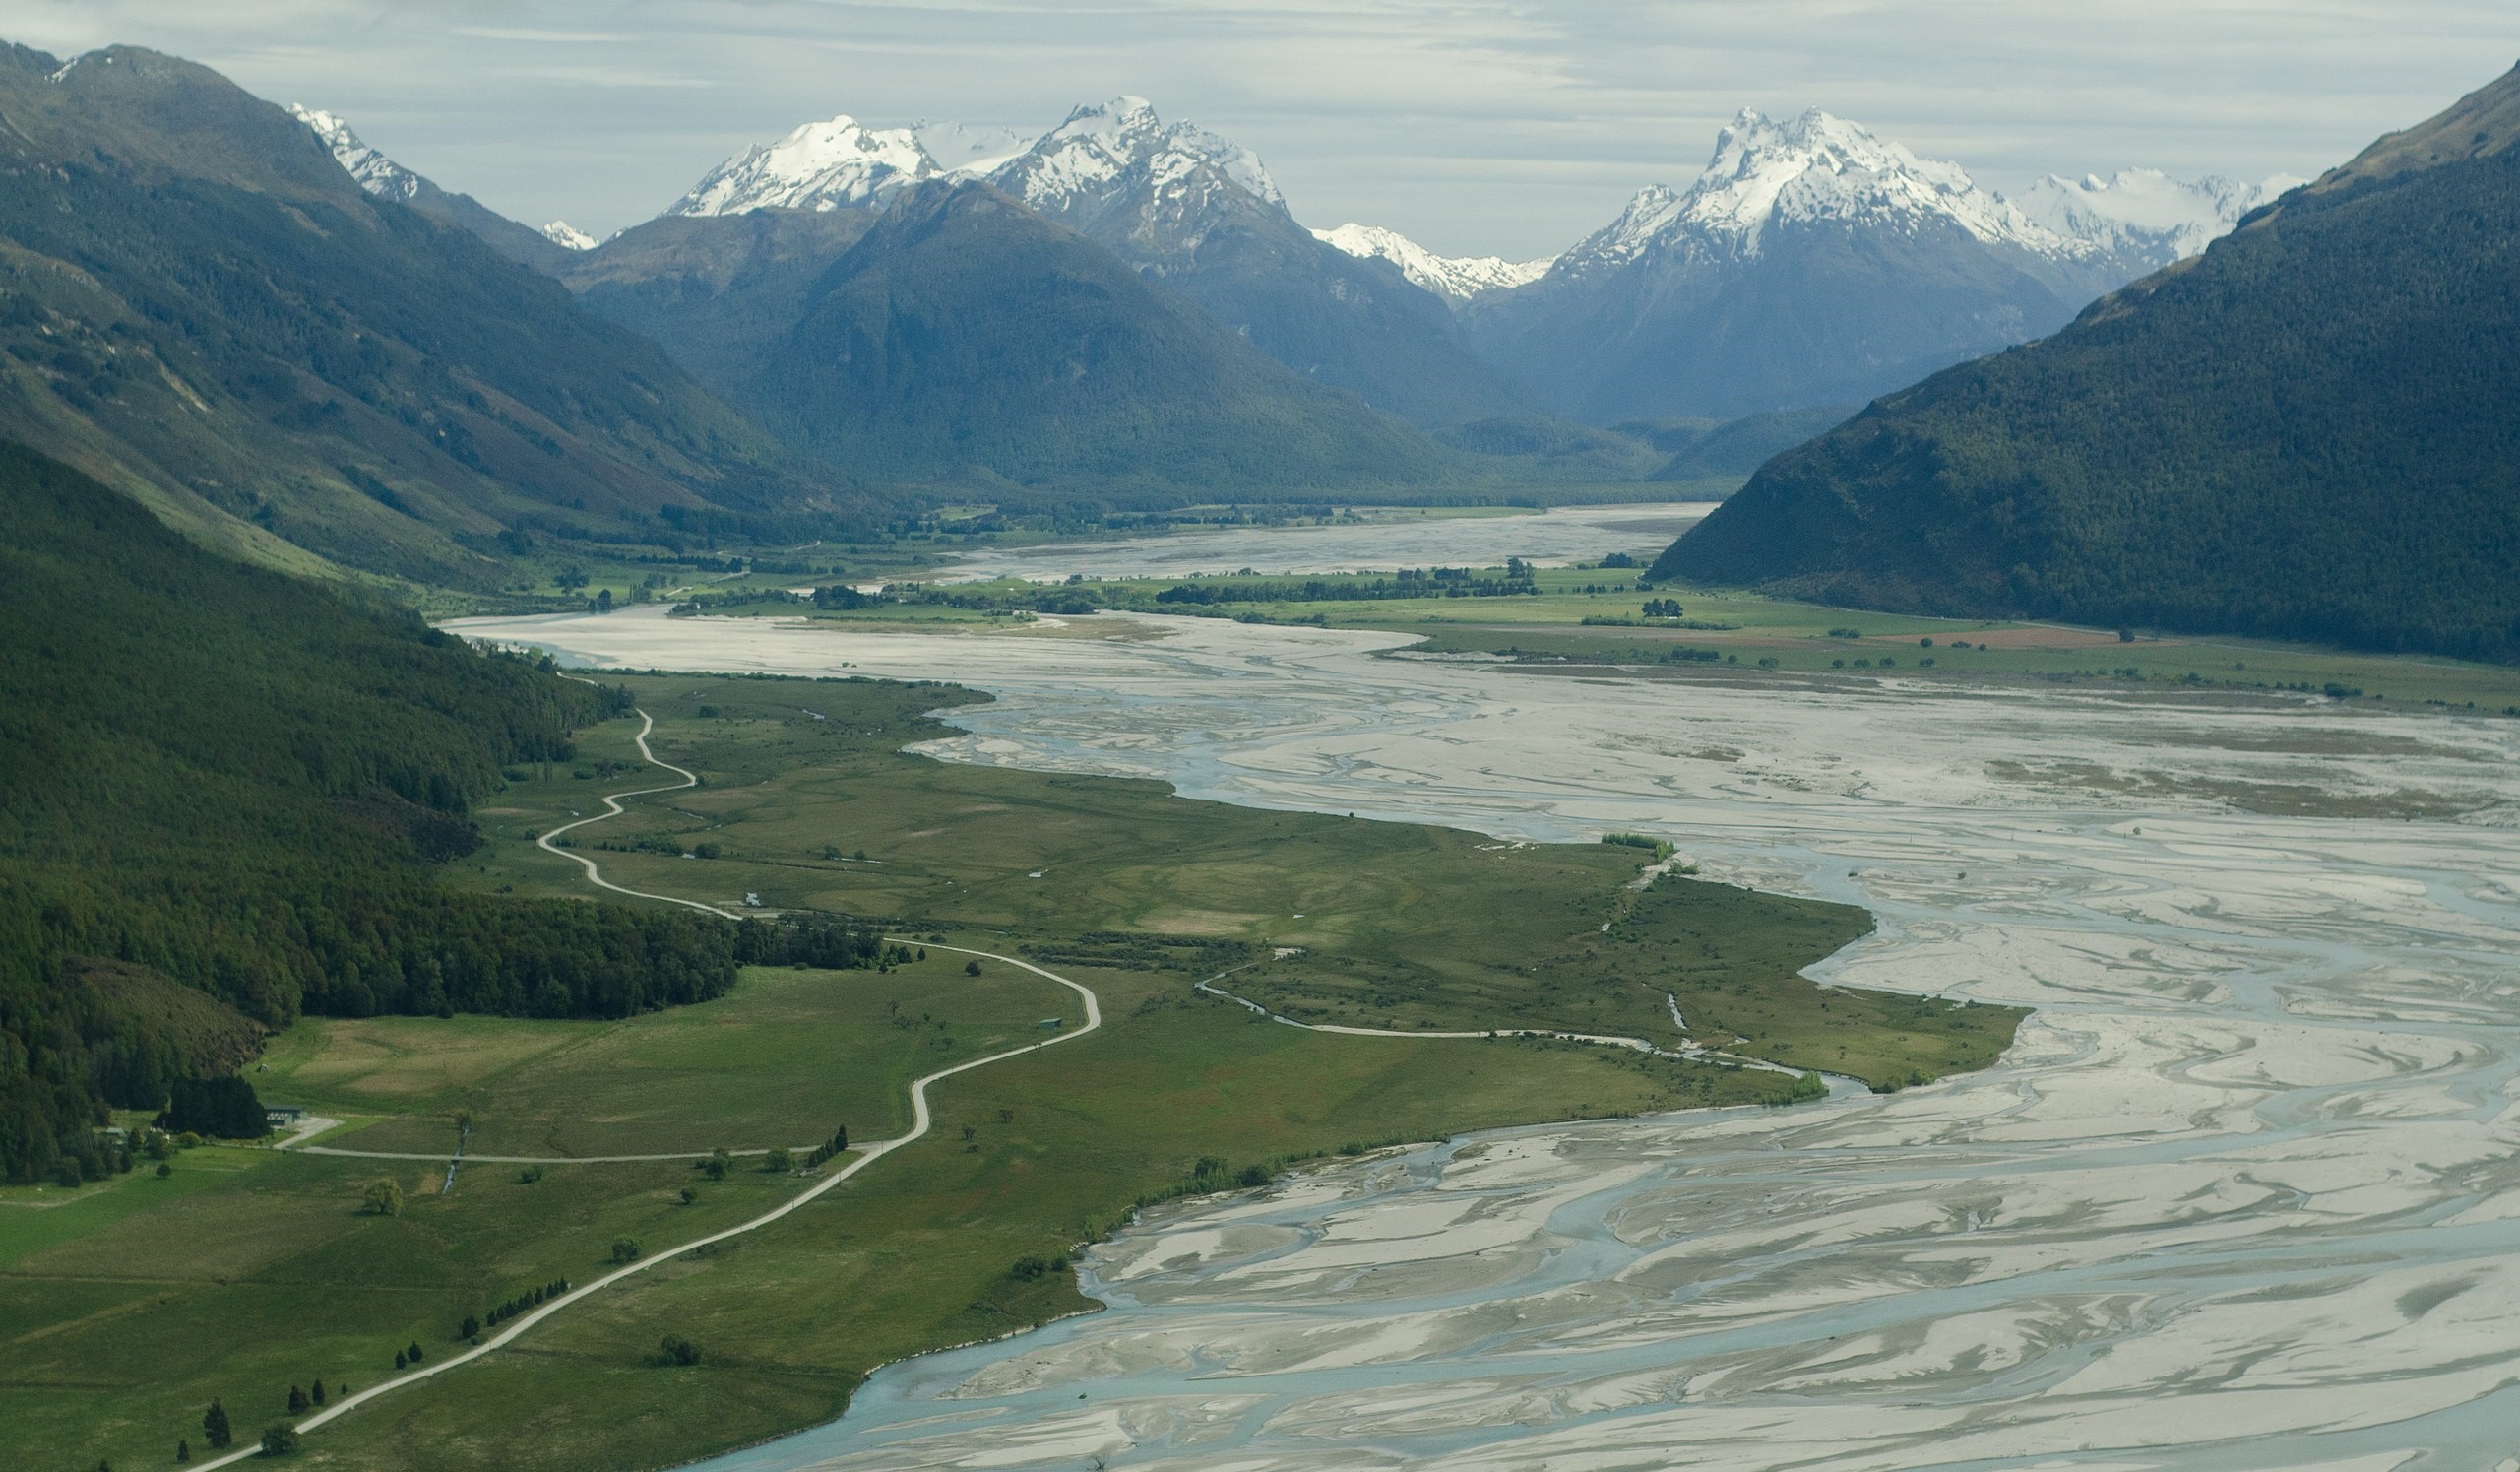 The state of New Zealand’s natural infrastructure – Expert Reaction